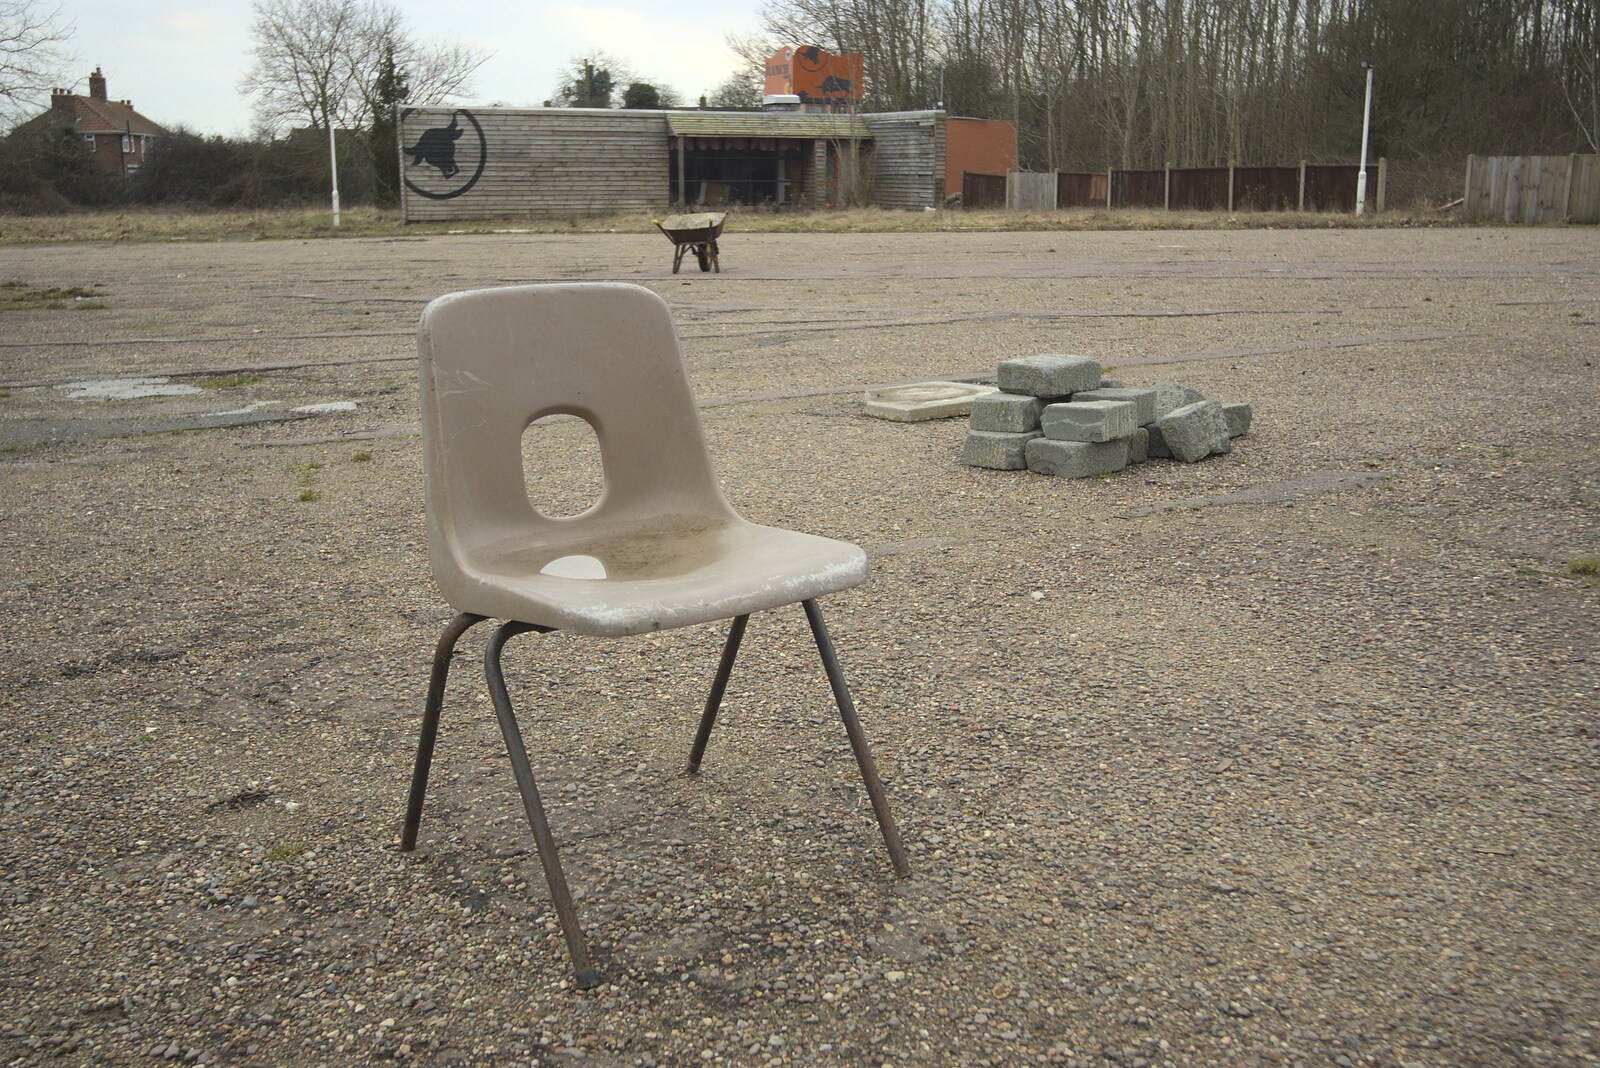 Science Park Demolition and the Derelict Ranch Diner, Cambridge and Tasburgh, Norfolk - 17th March 2010: A discarded plastic chair at the Ranch Diner